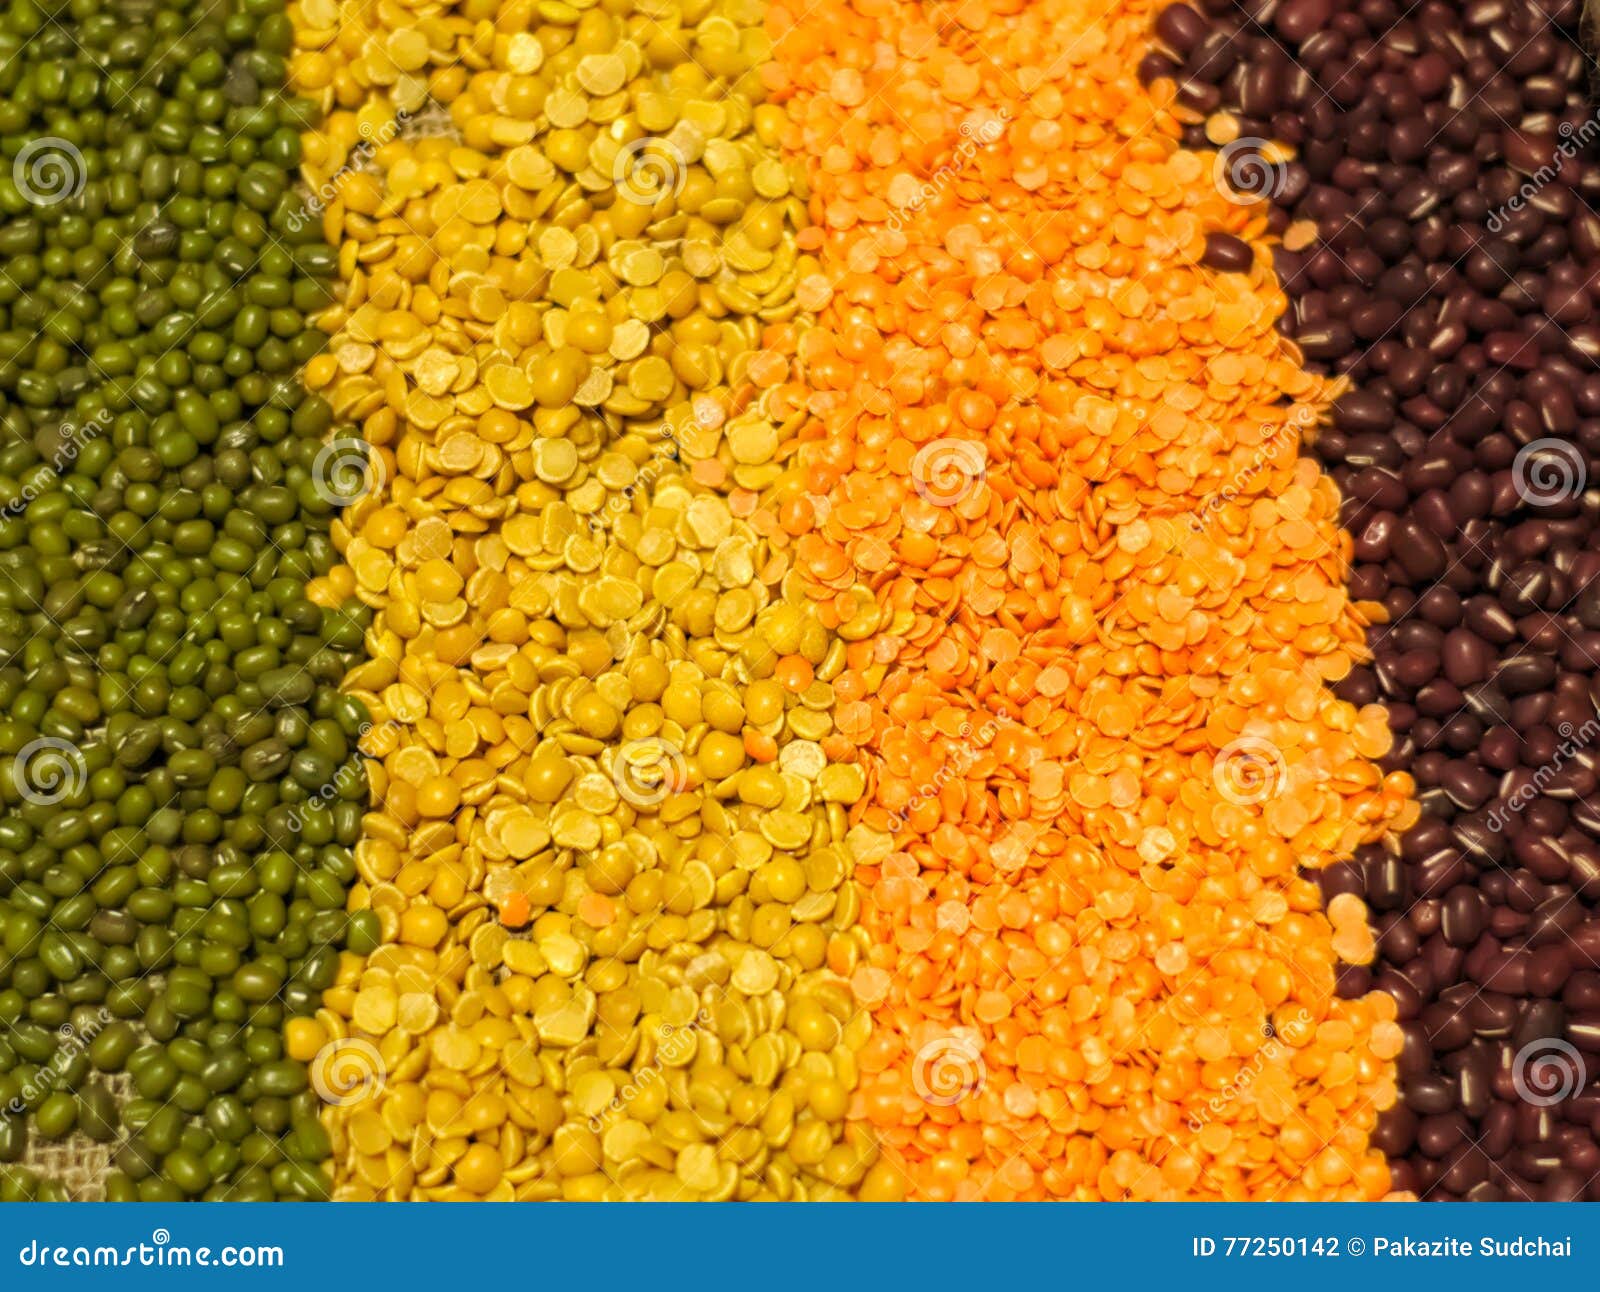 Green Peas, Split Peas, Red Lentils, and Red Beans Stock Photo Image closeup: 77250142